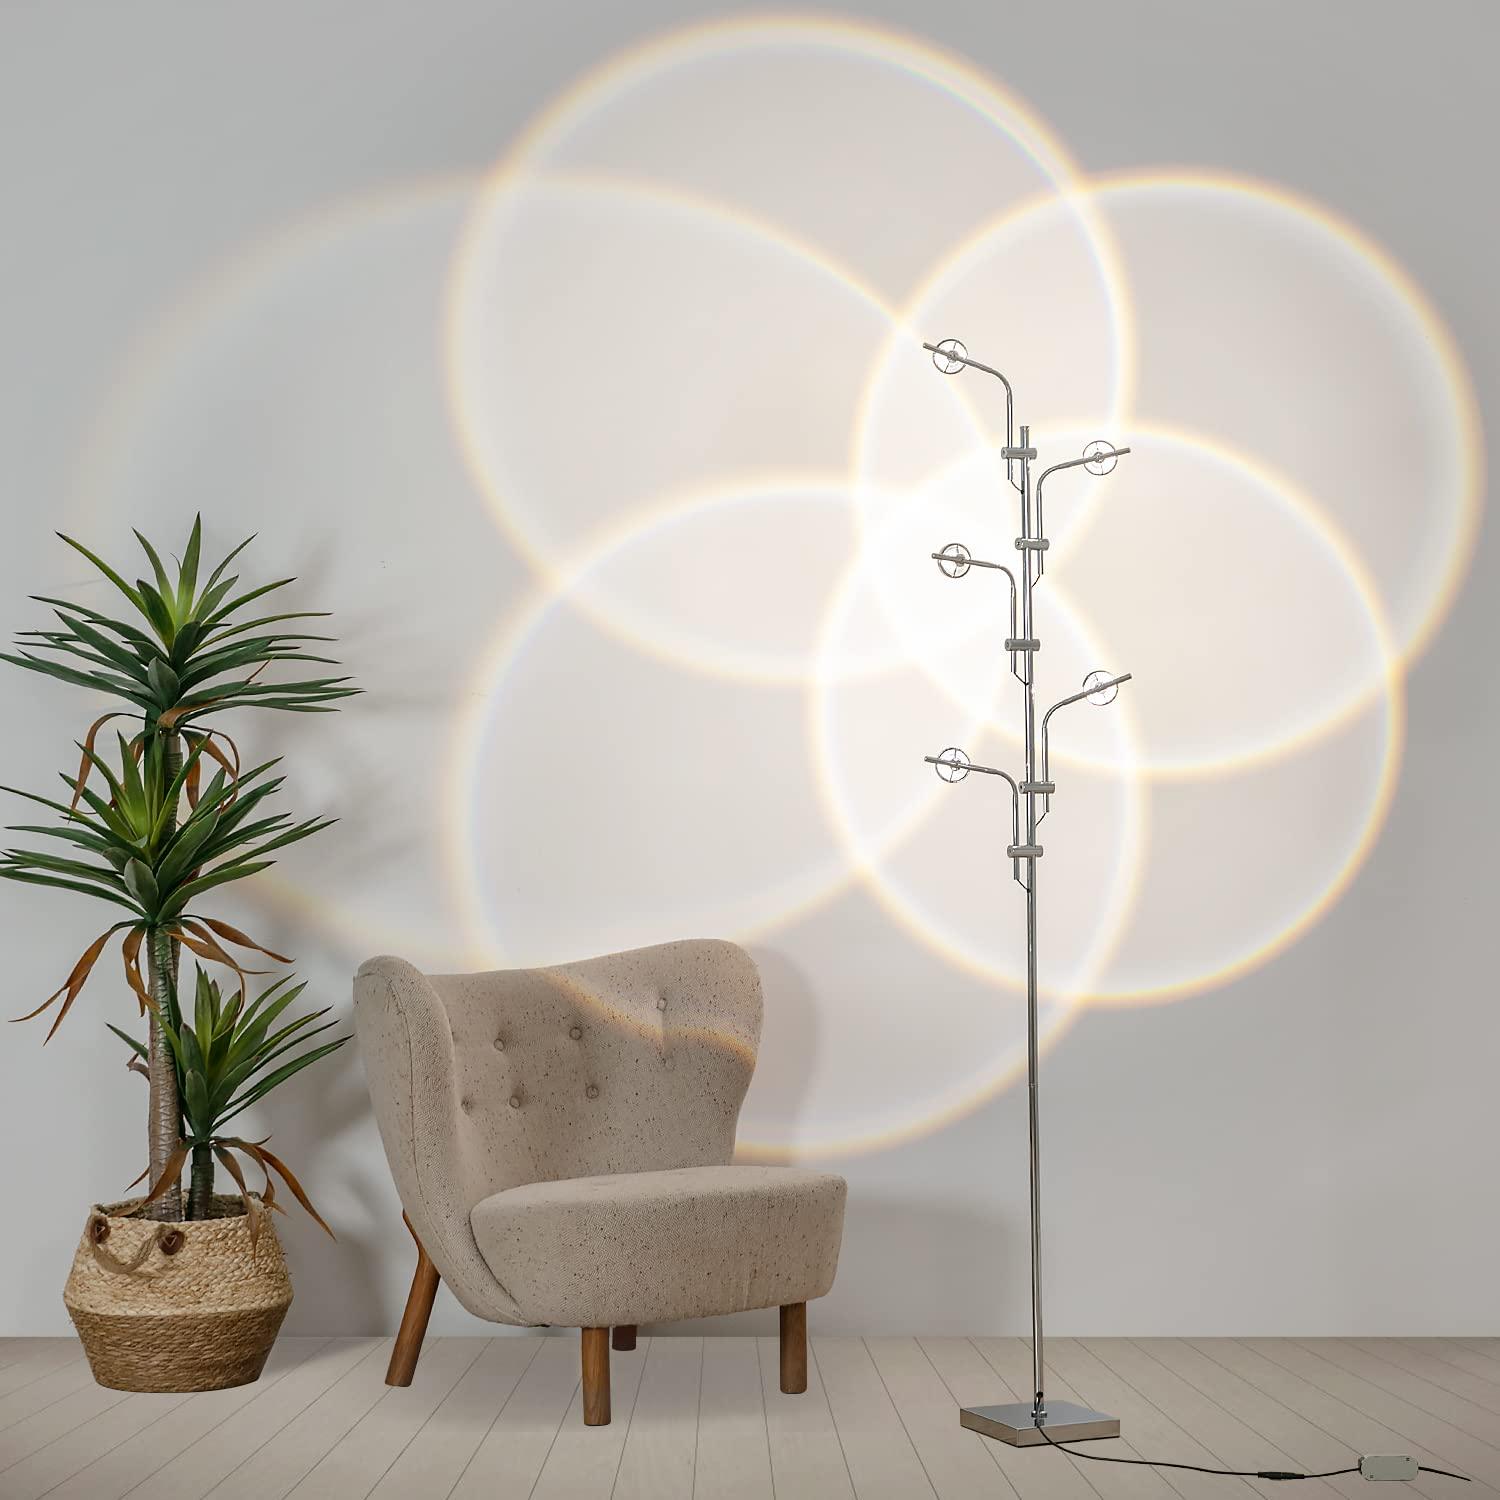 KITVONA Mid Century Modern Floor Lamp for Living Room, Industrial Standing Lamp for Bedroom, Boho Ambient Lighting, Cool Mood Lighting with 5 Light Spot, Natural Light with 7 RGB Color Filter